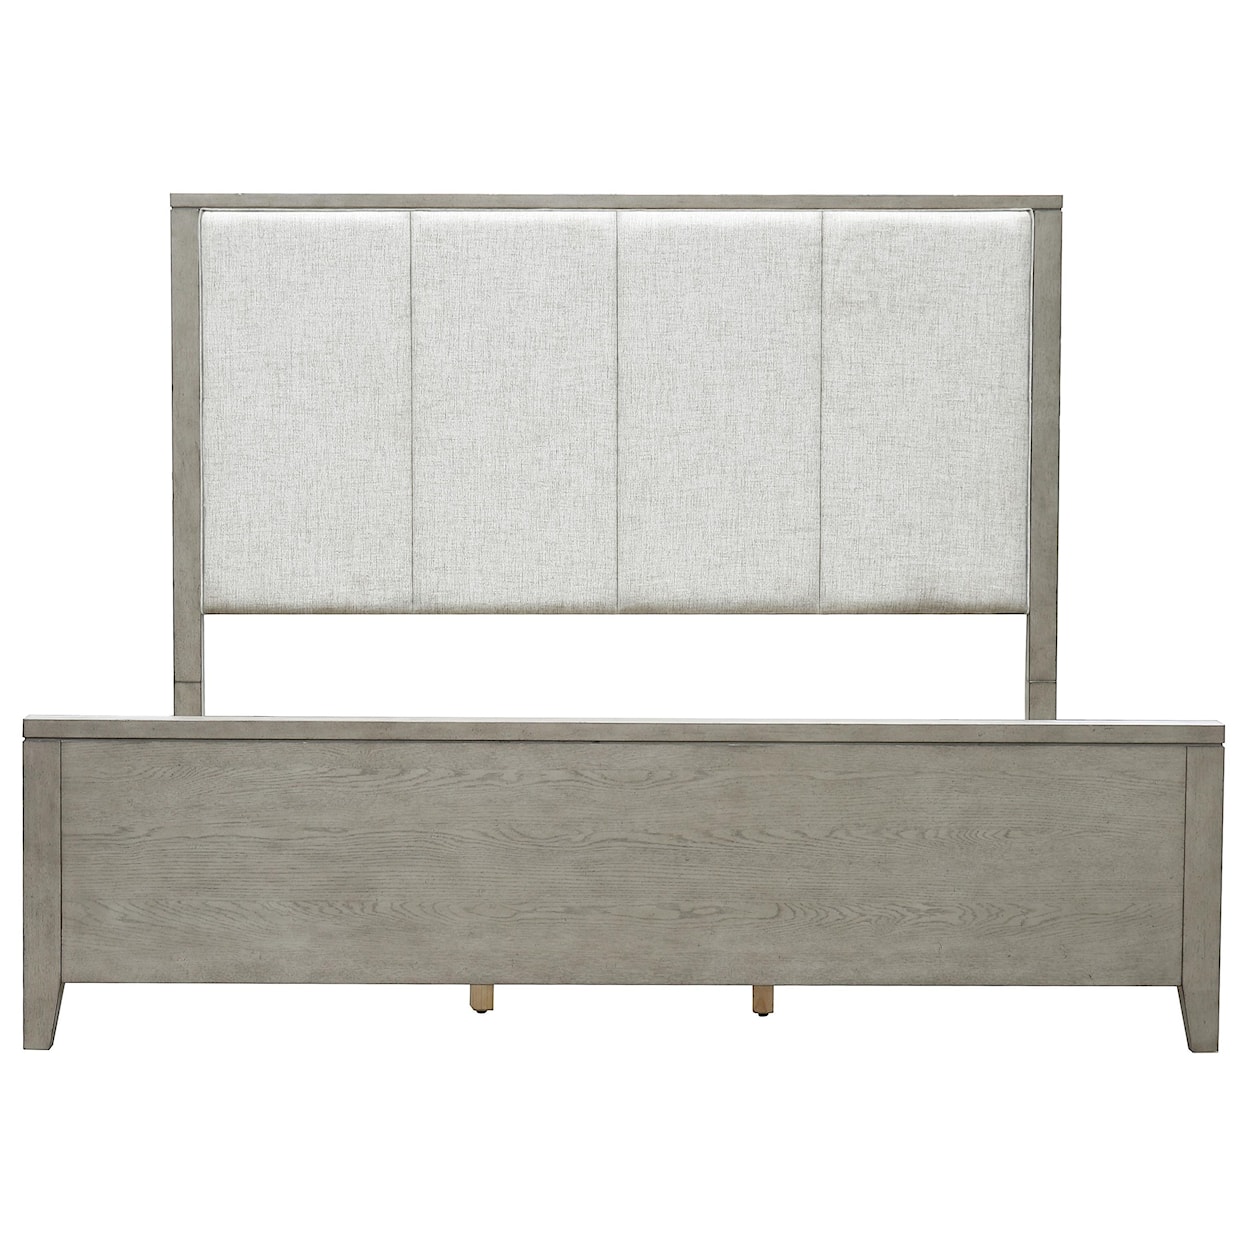 Samuel Lawrence Essex by Drew and Jonathan Home Essex Queen Upholstered Bed